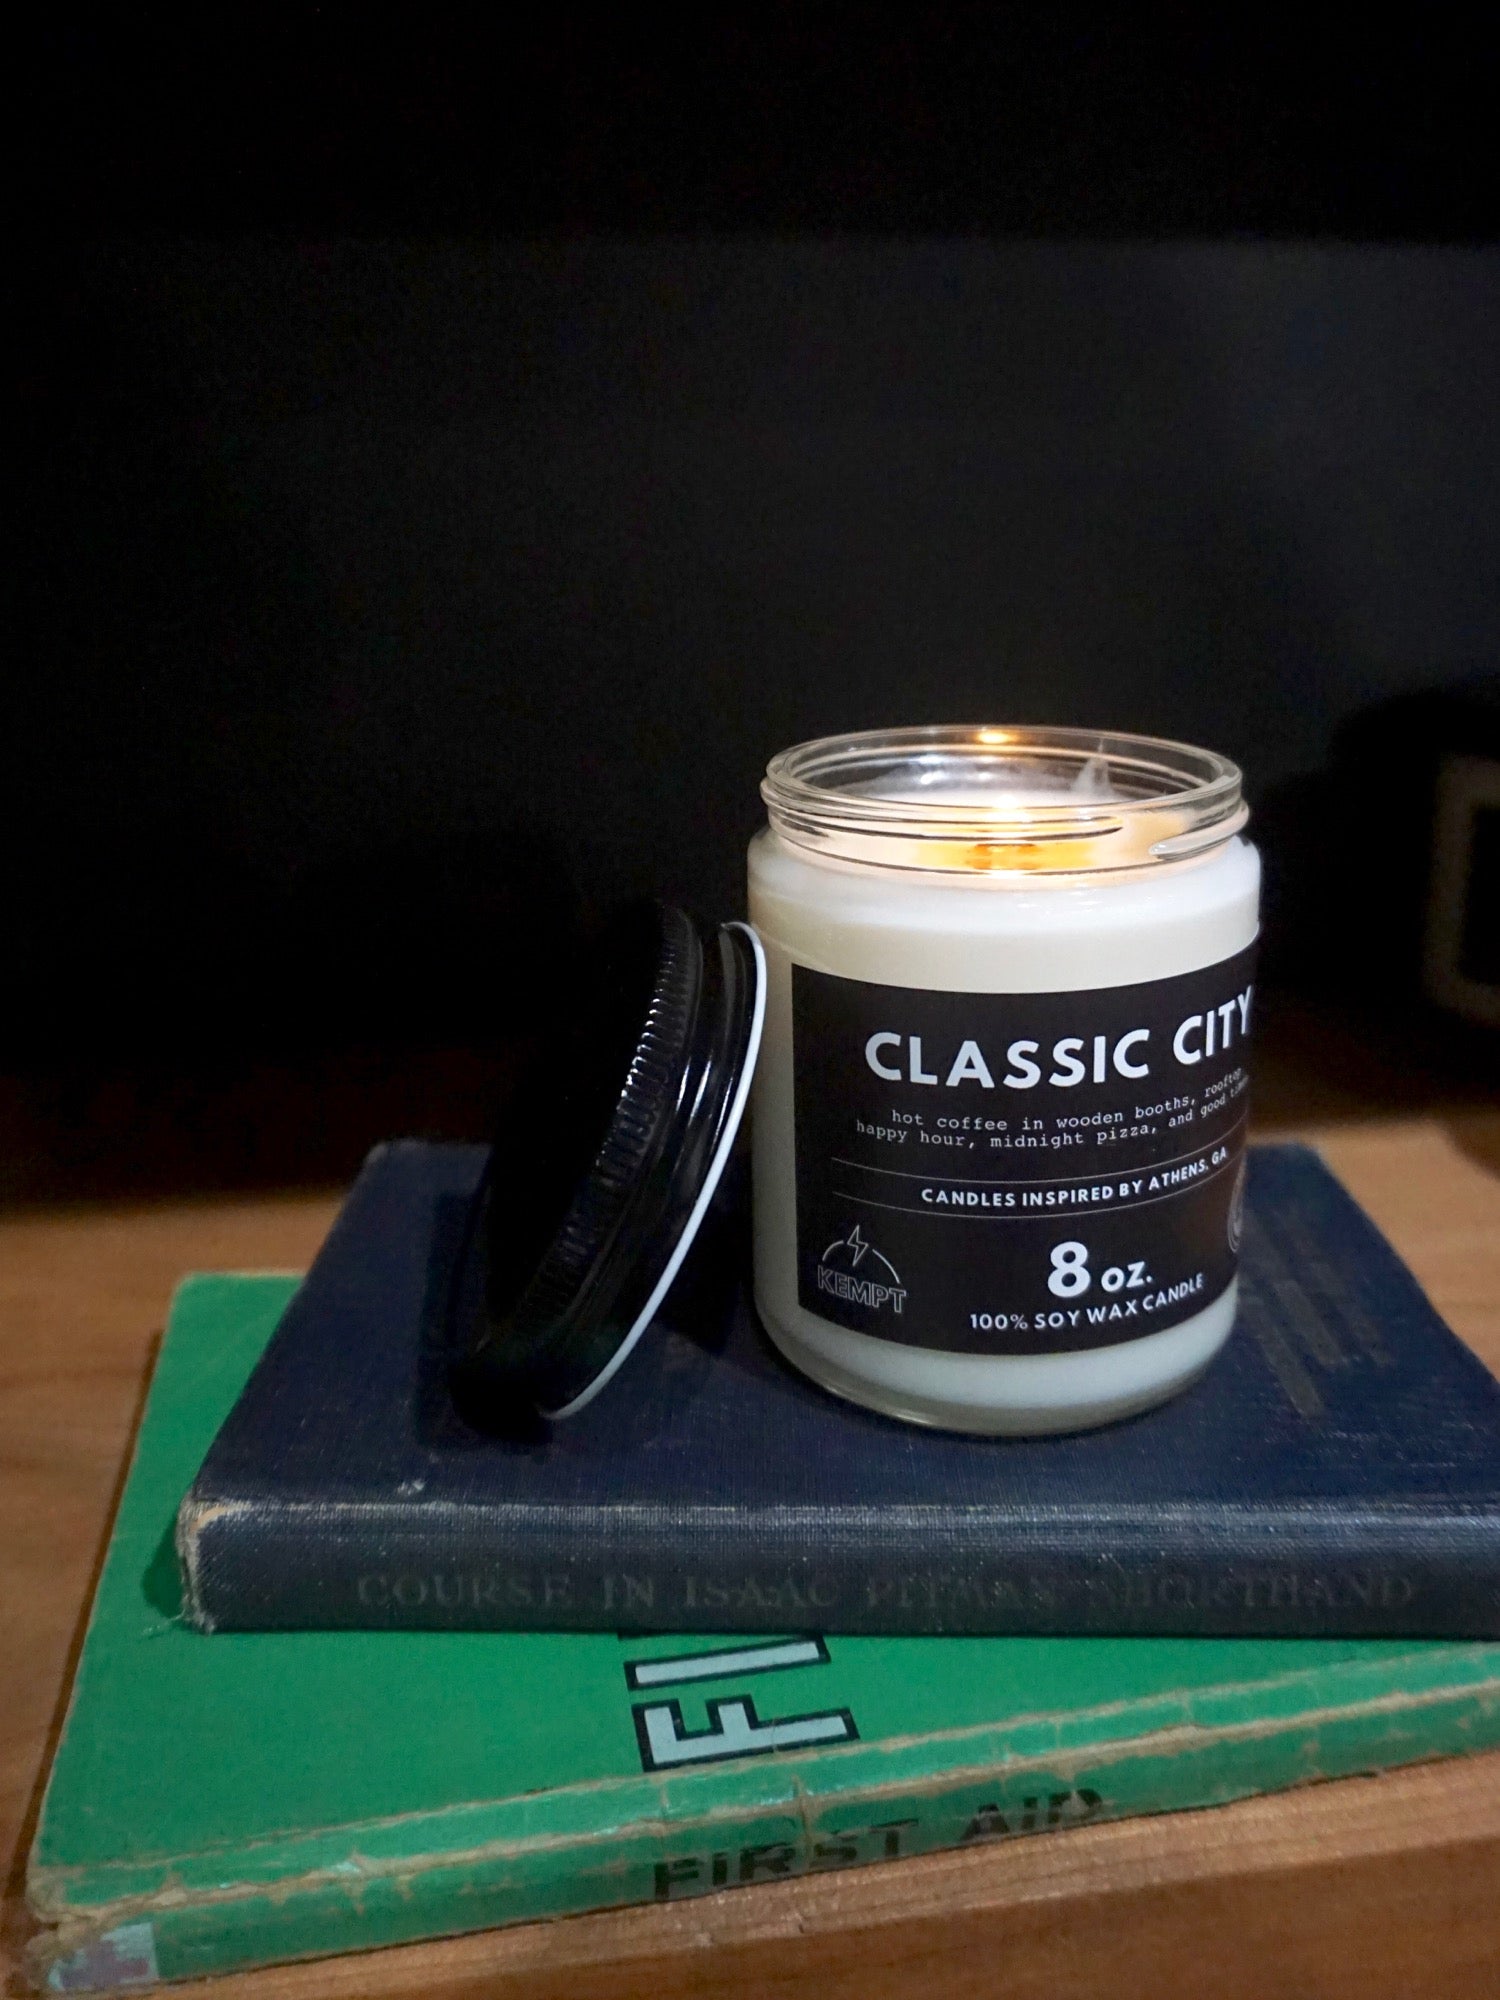 Classic City Athens GA Candle Kempt with Rekindle Candle